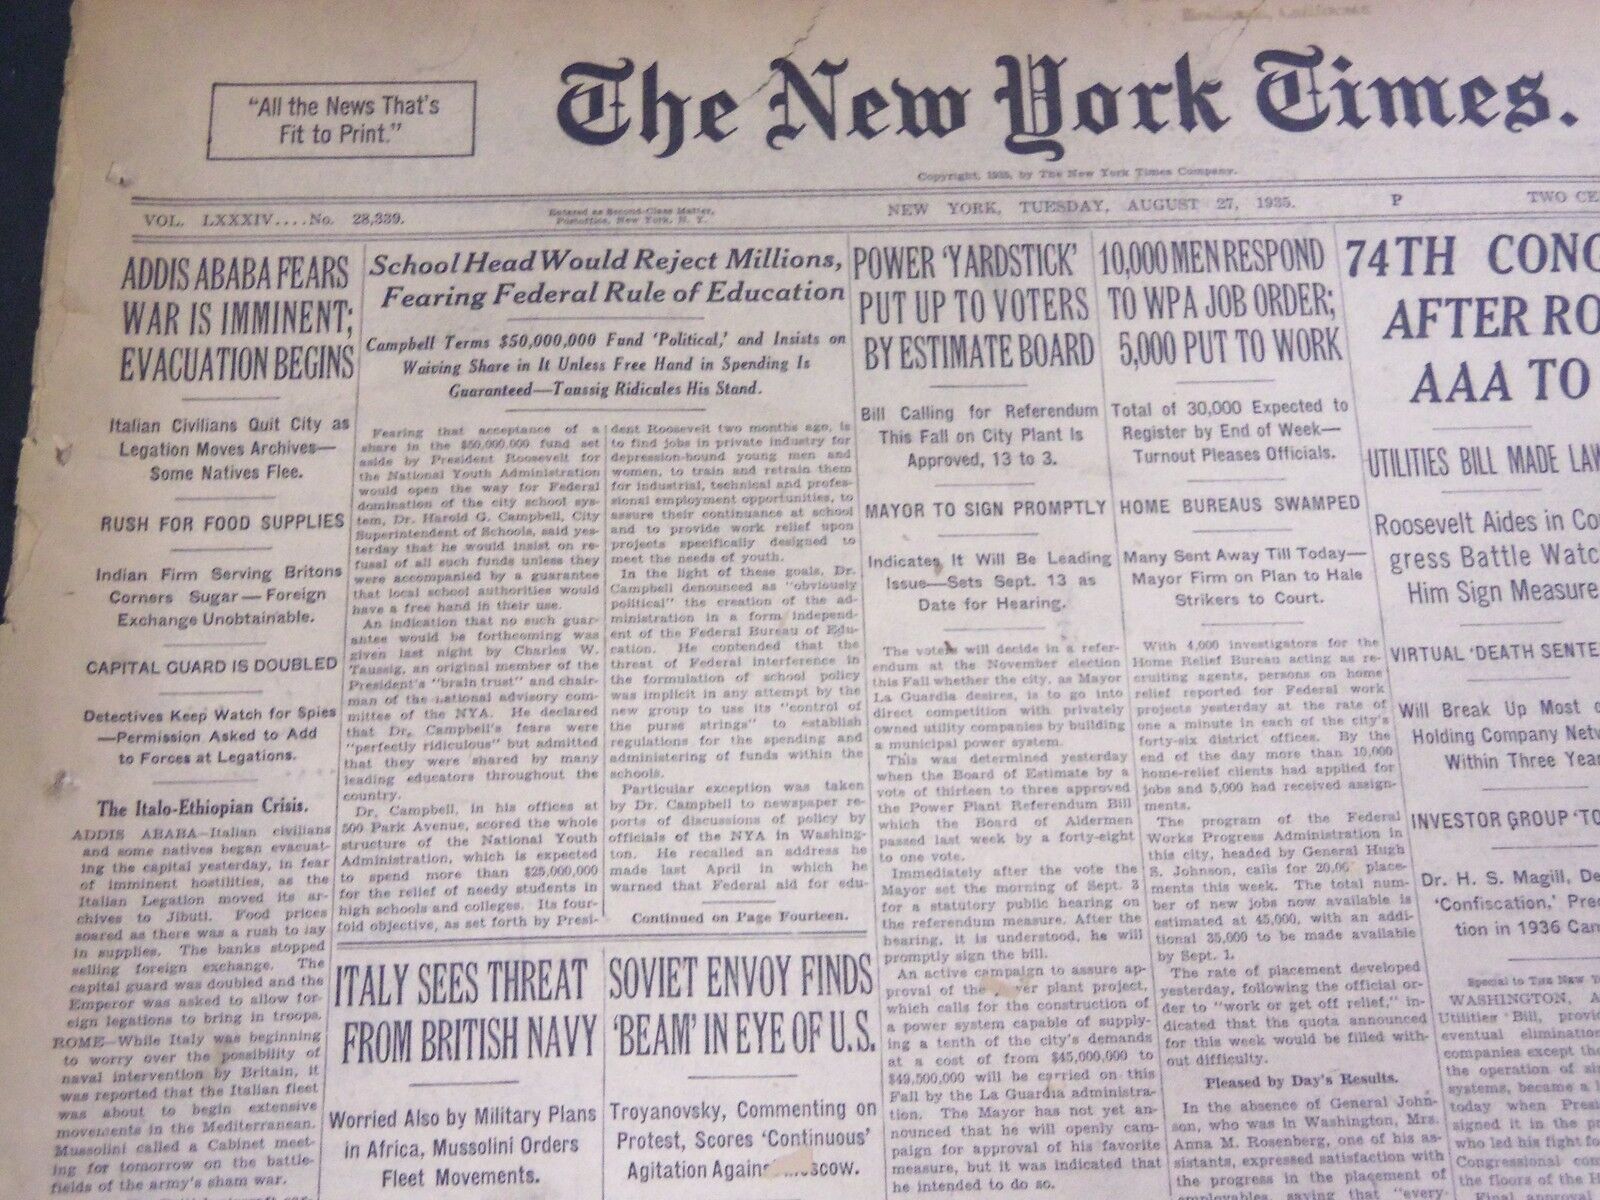 1935 AUGUST 27 NEW YORK TIMES - ADDIS ABABA FEARS WAR IS IMMIENT - NT 4911